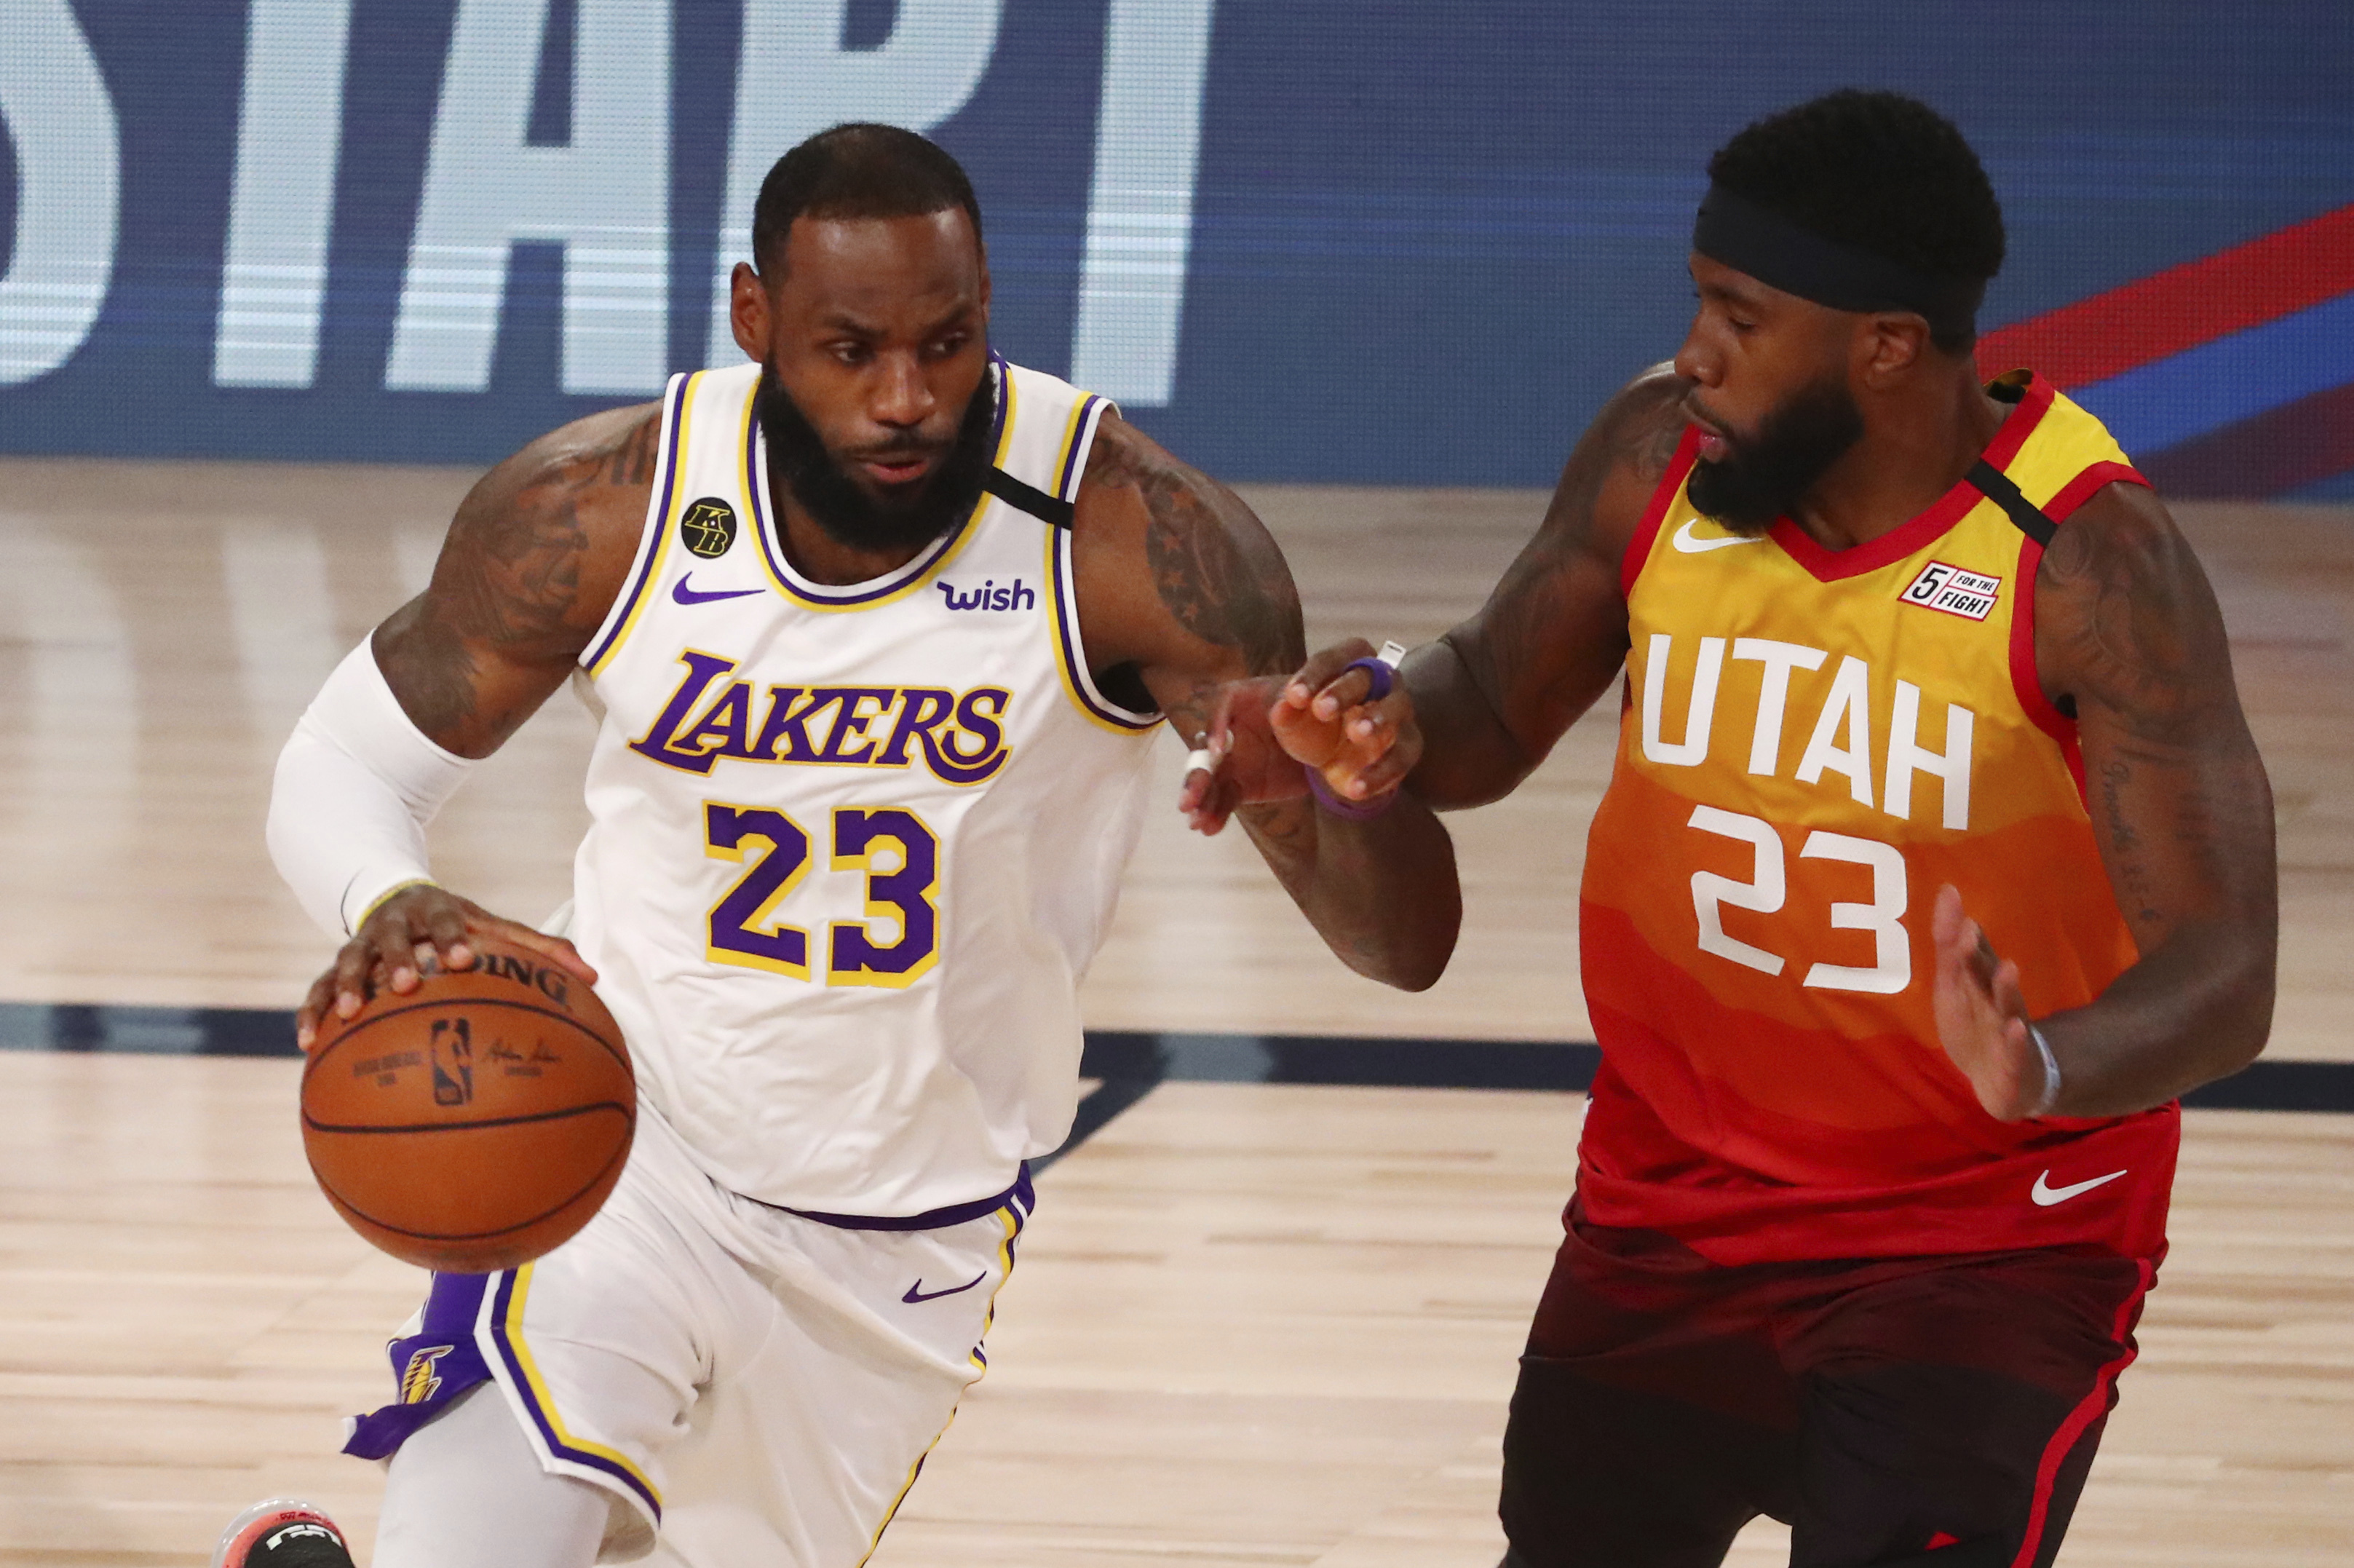 Los Angeles Lakers at Utah Jazz free live stream (2/24/21) How to watch NBA, time, channel